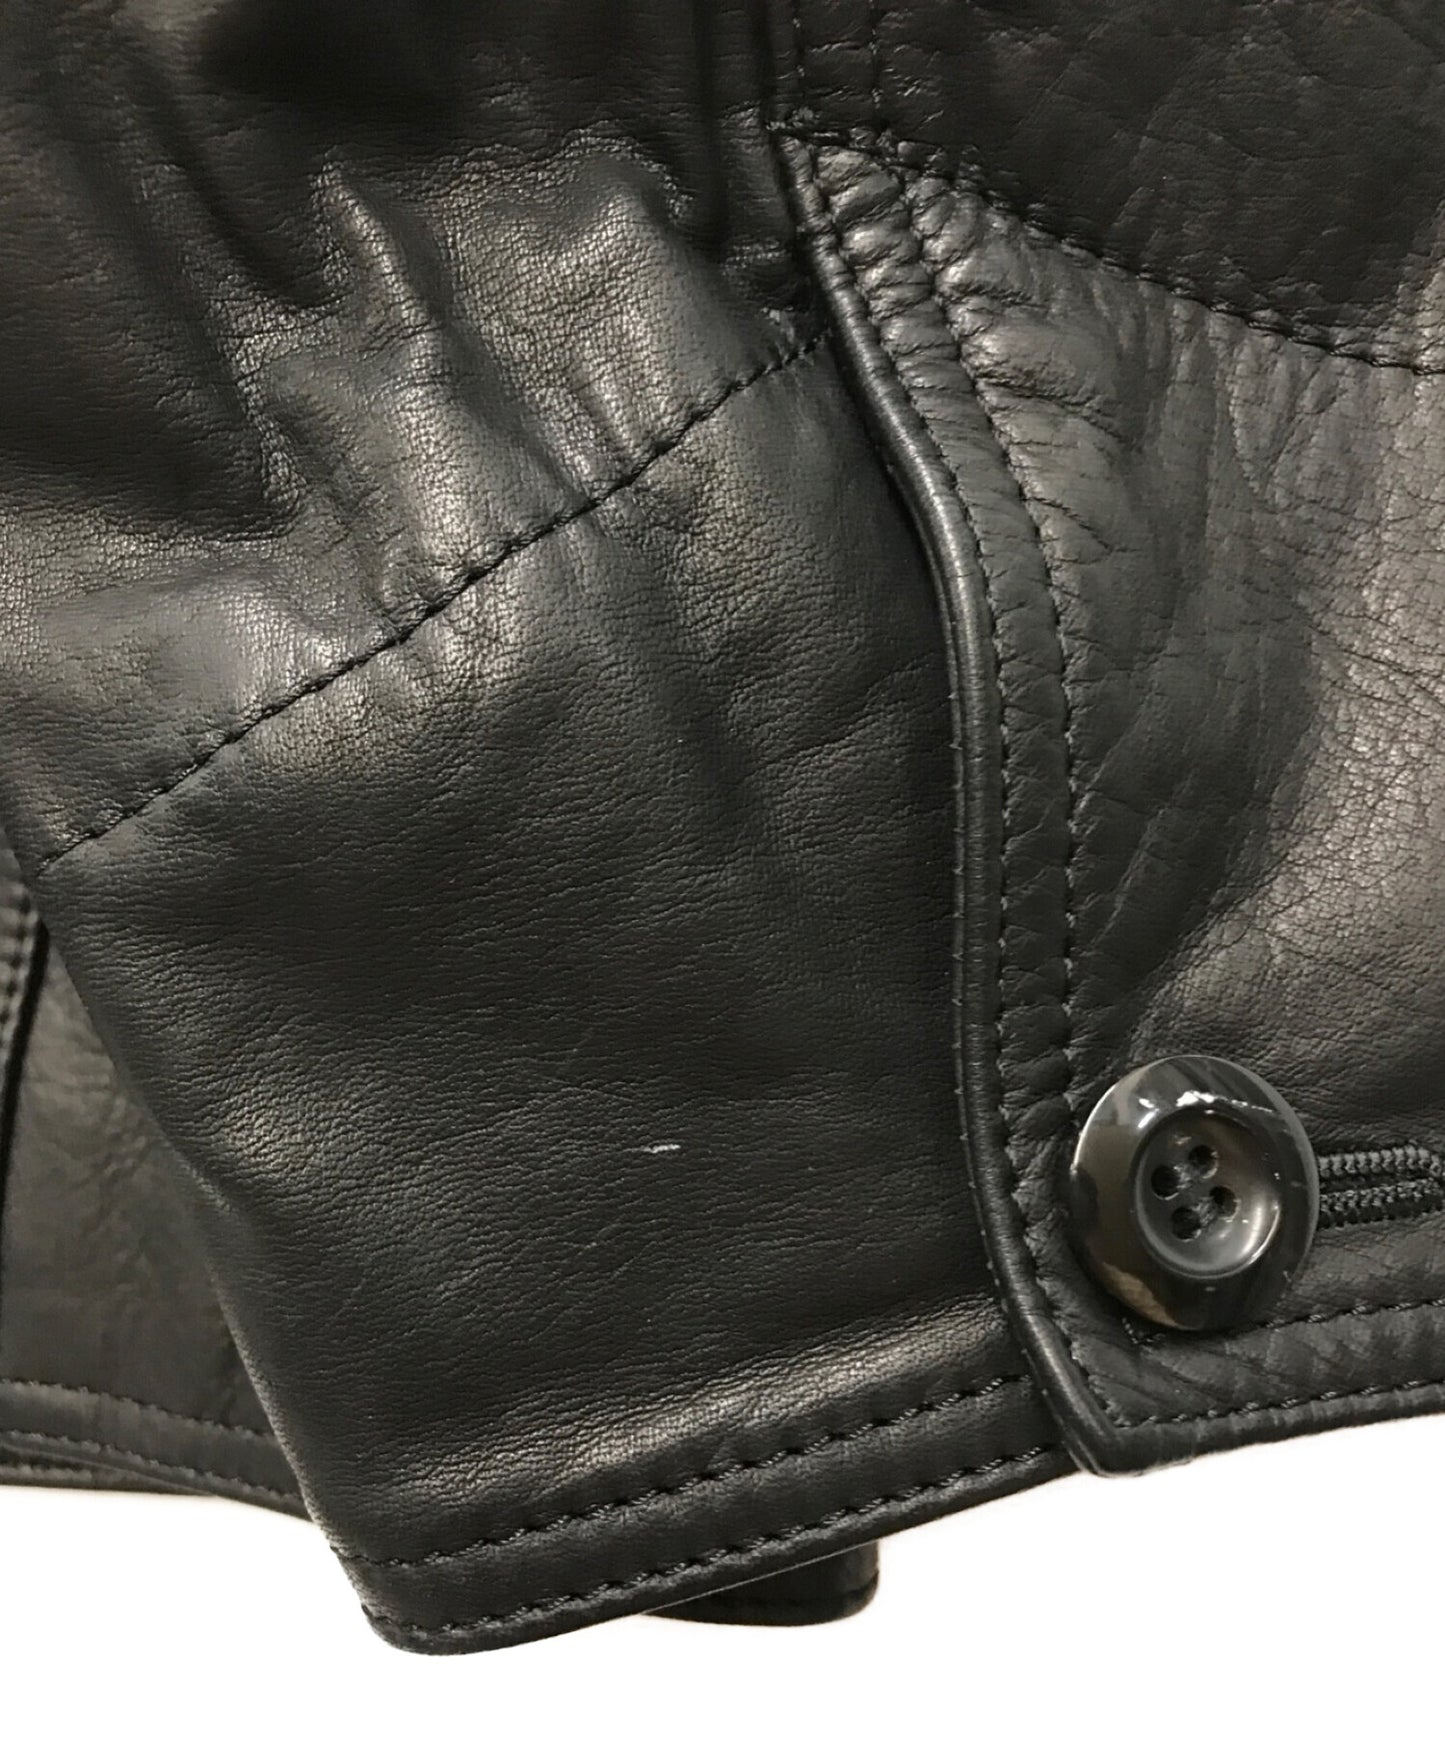 [Pre-owned] FLAGSTUFF×blackmeans Cow Leather Jacket 21AW-FS-01